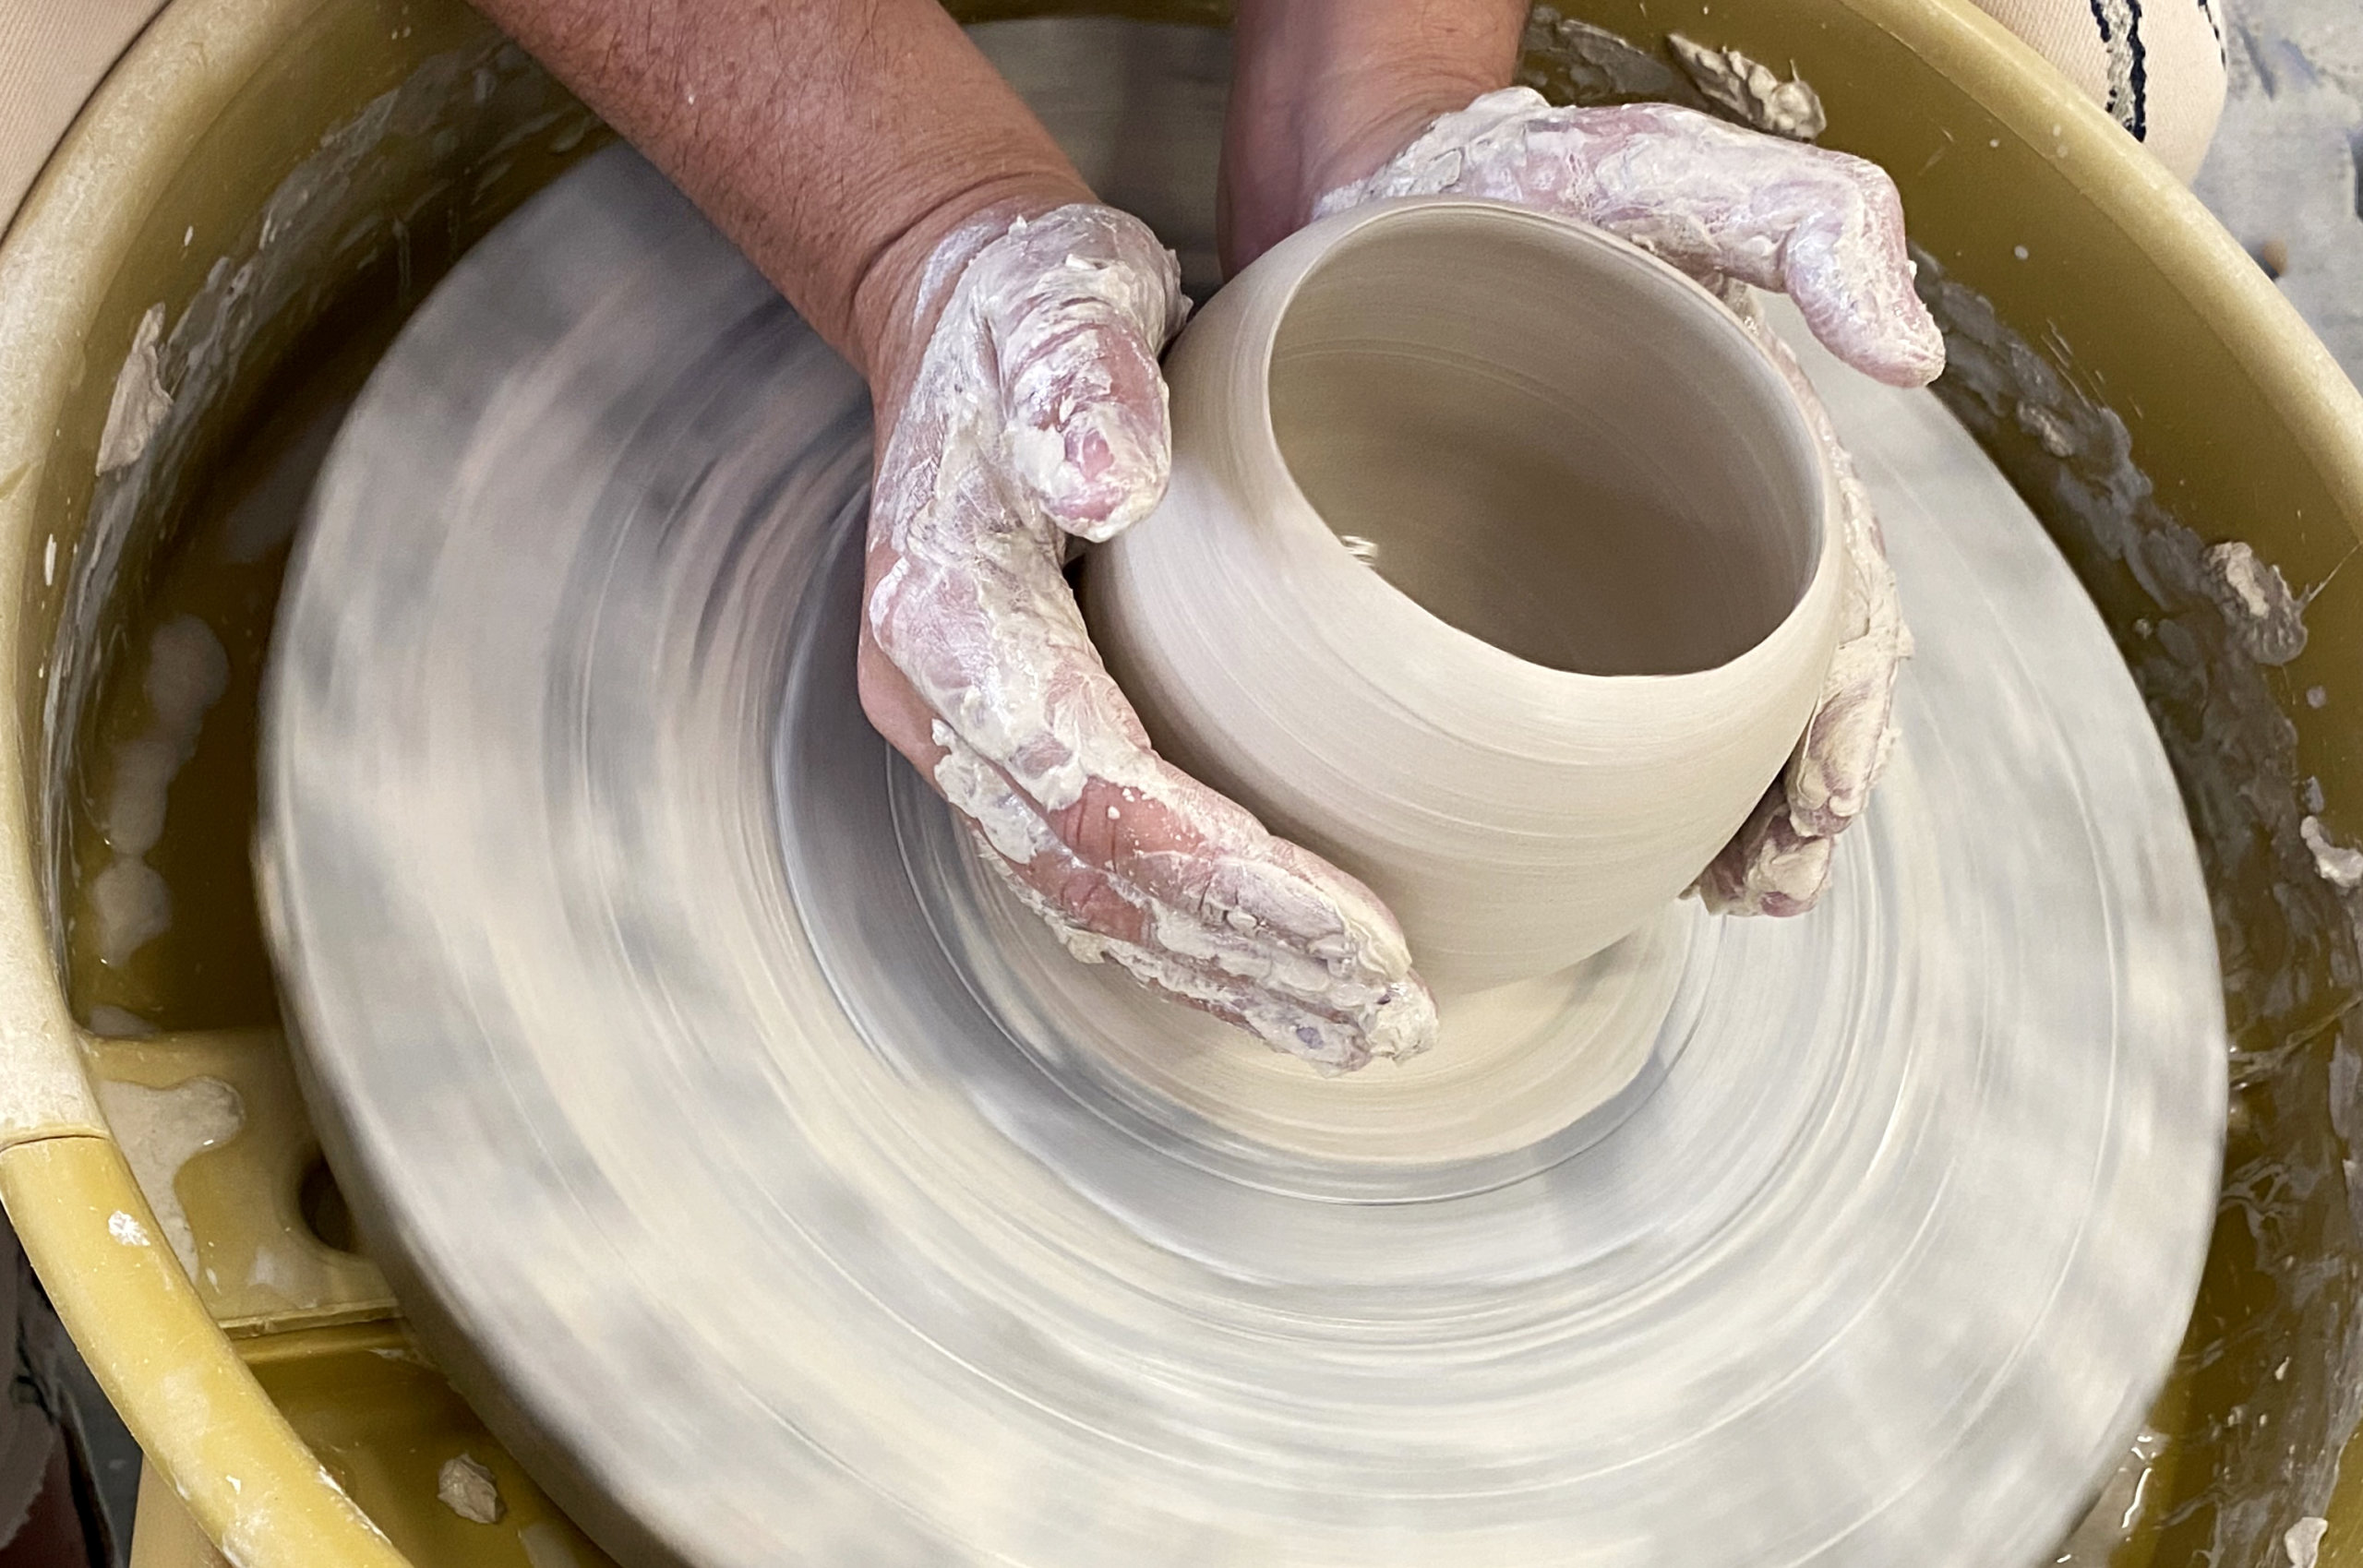 Ceramics/pottery classes in Encinitas - We offer ceramics classes, pottery wheel lessons, hand building workshops and equipment use.